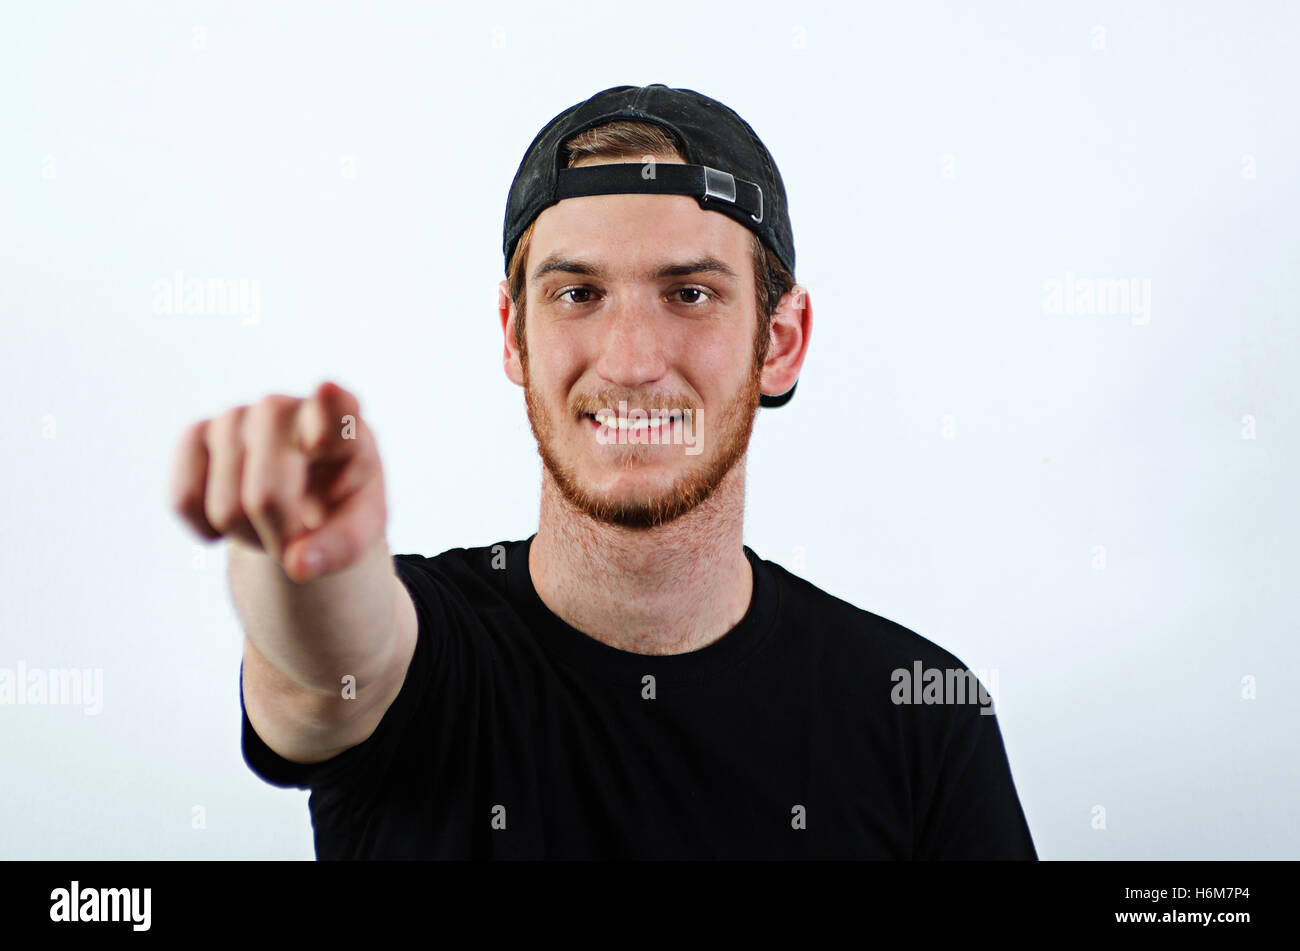 Smiling Young Adult Male in Dark T-Shirt and Baseball Hat Worn Backwards Pointing Towards the Viewer Stock Photo